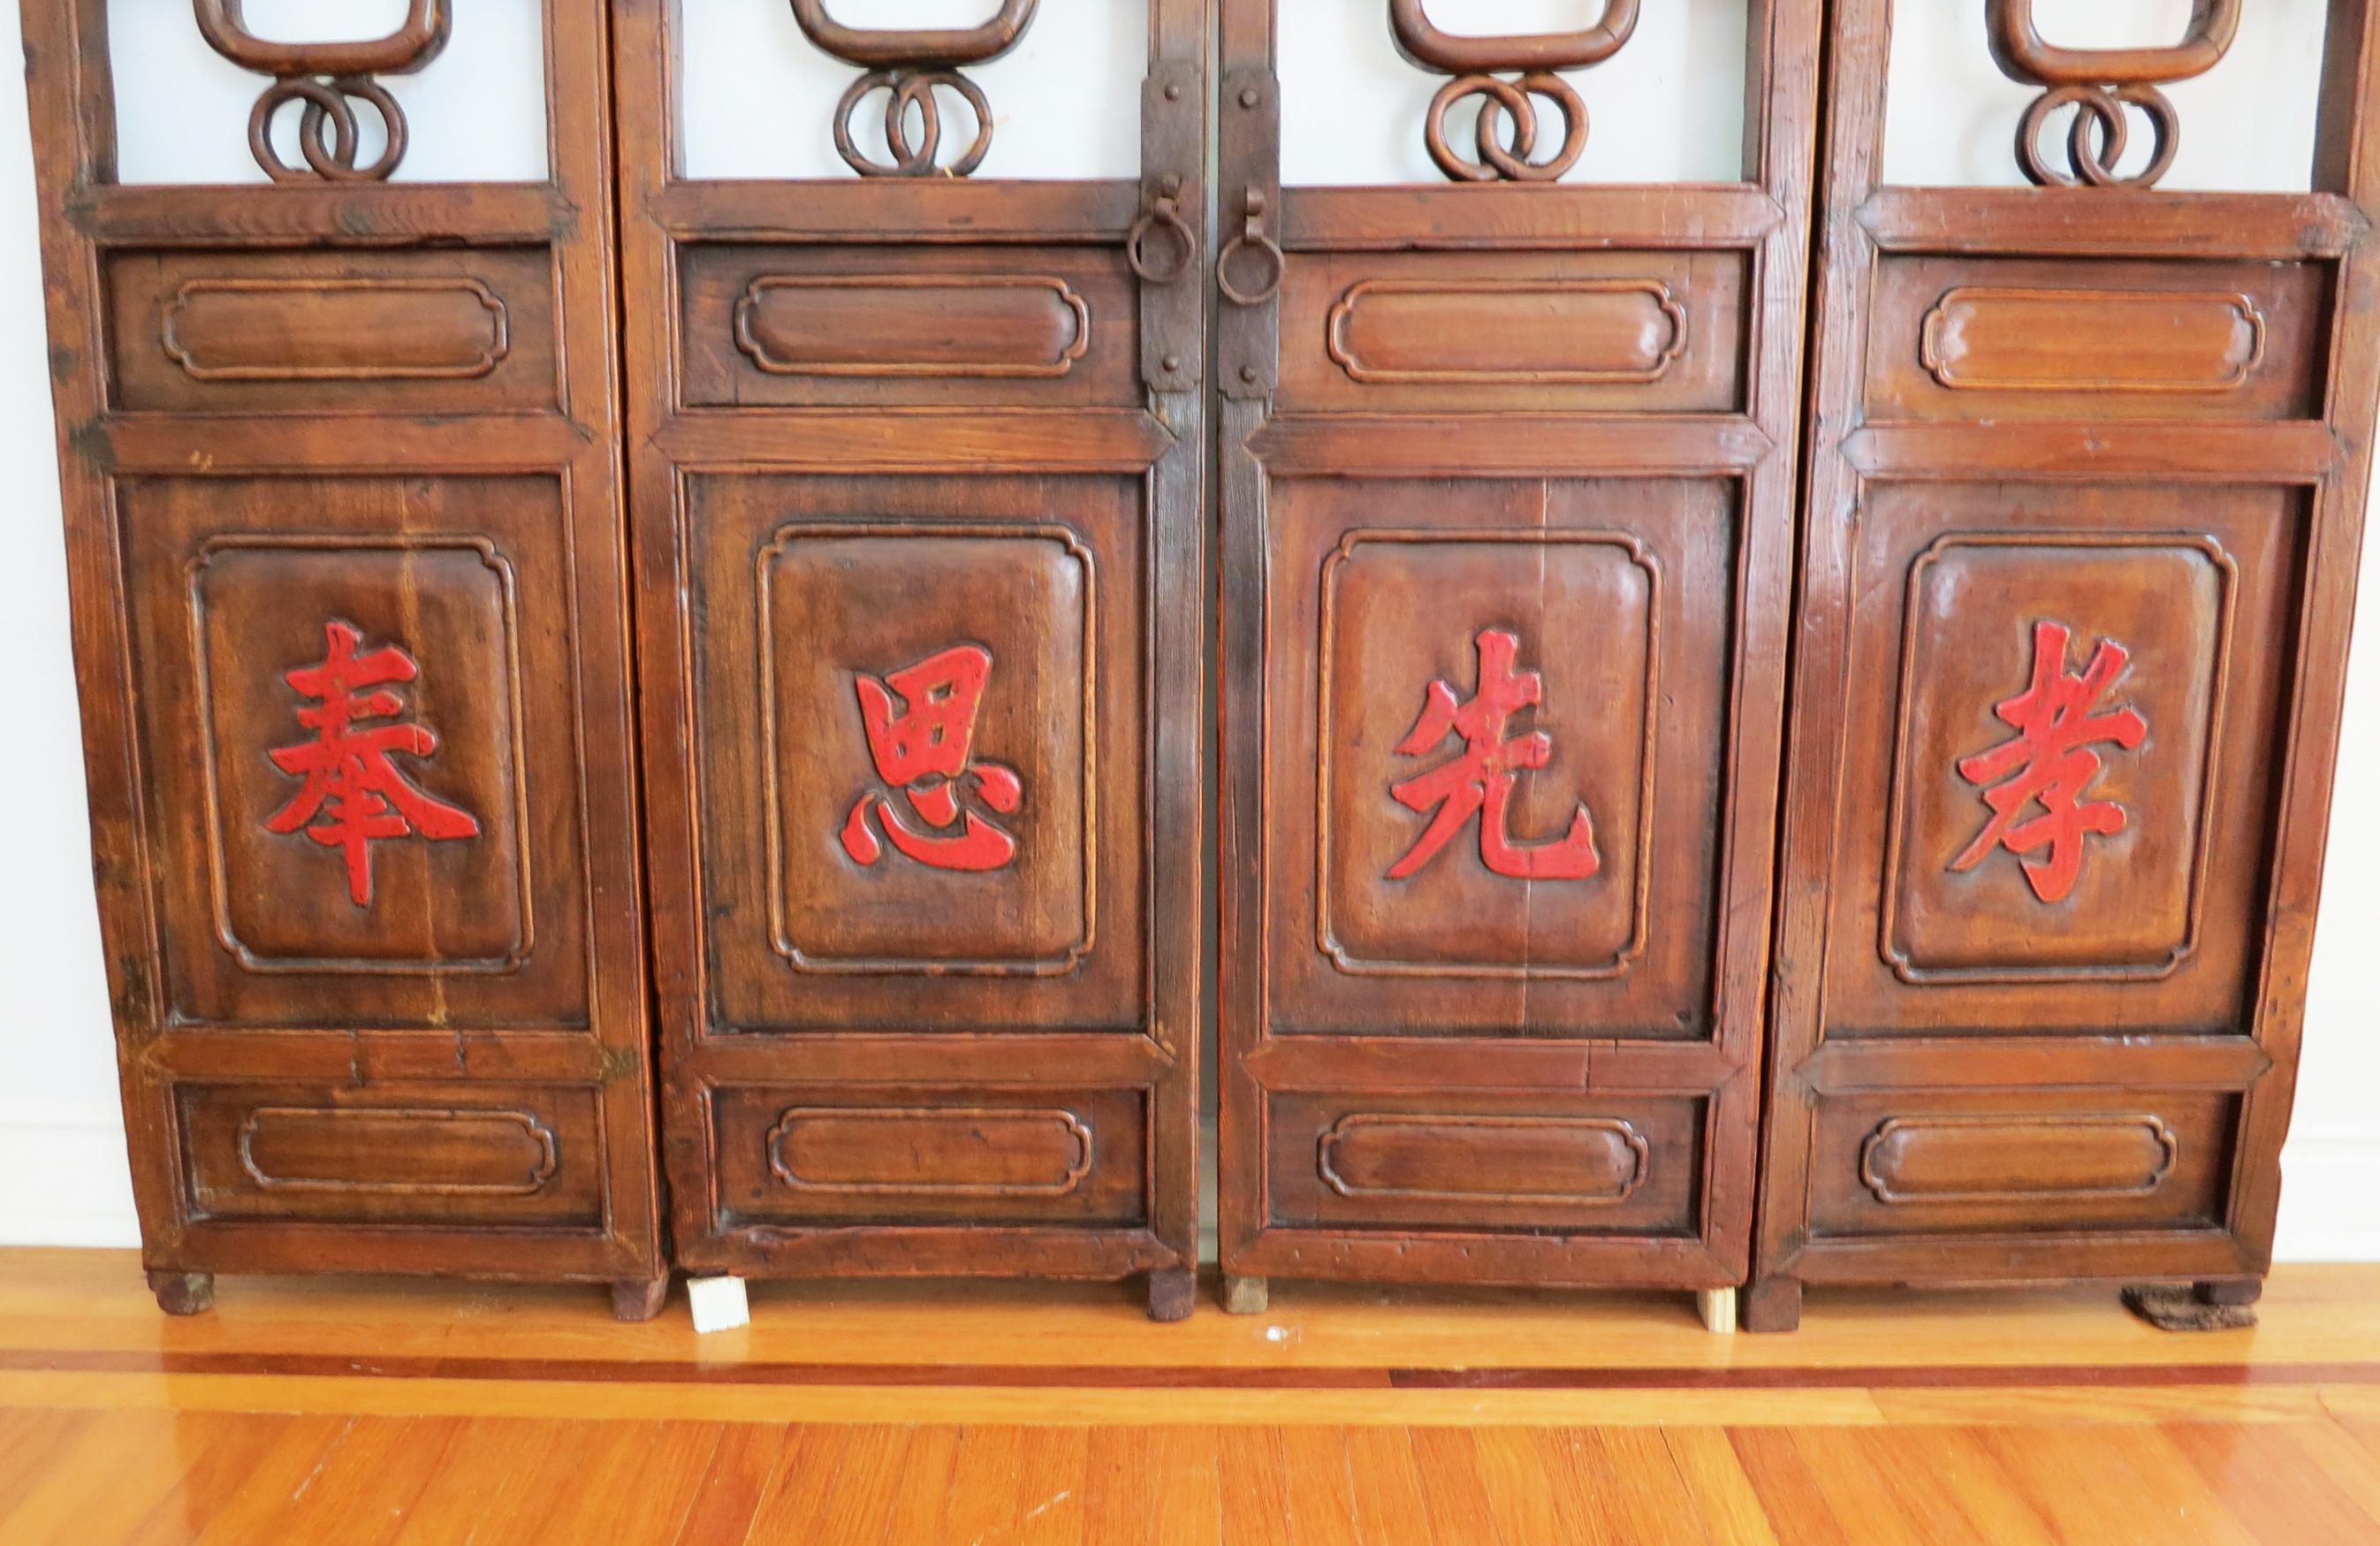 This set of four, Chinese carved window screens is from an 19th century house from the Shanxi province of China. Carved from Chinese Northern Elm, the center lattice work is carved the longevity symbol (shou). The four carved Chinese calligraphy